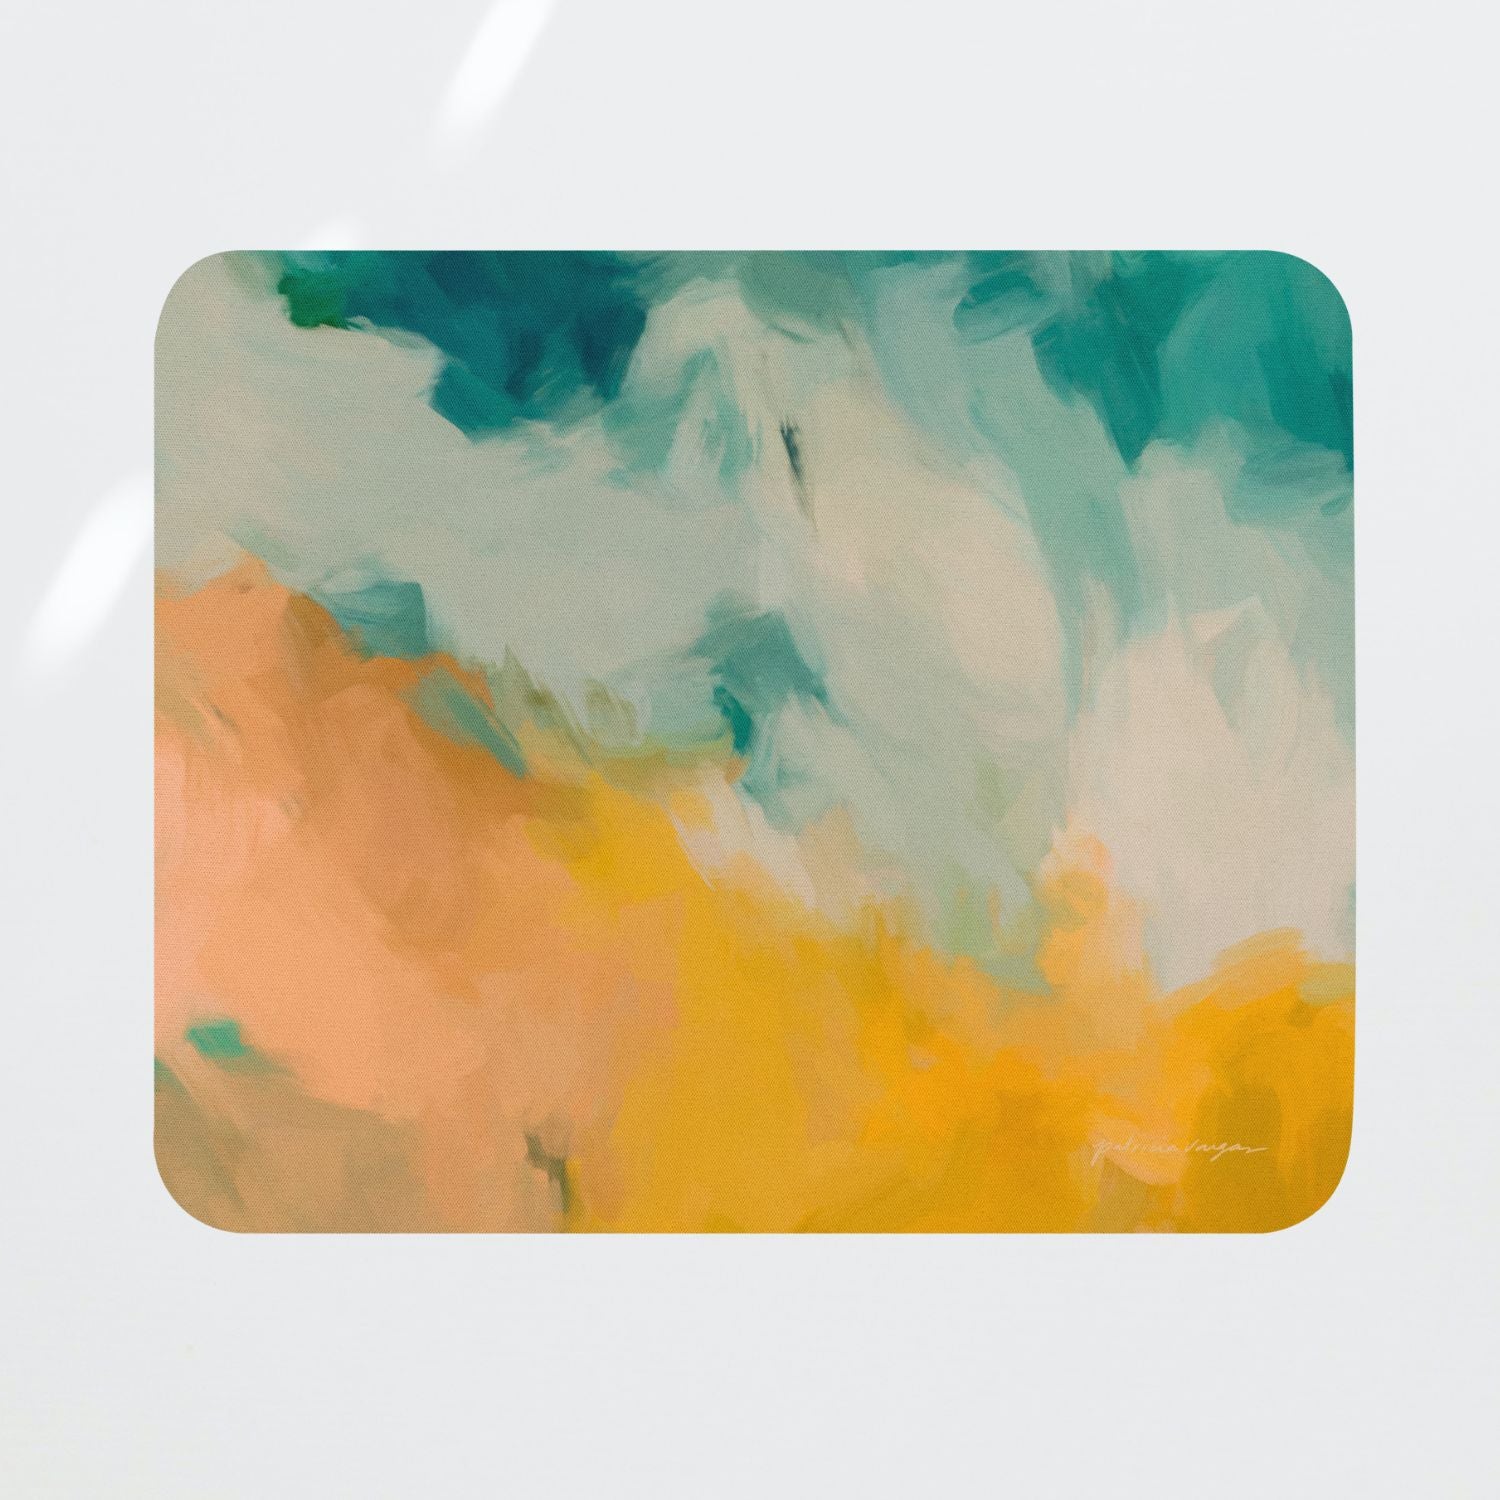 Beach Day, colorful mouse pad for styling your office desk. Featuring artwork by Parima Studio. Home office styling accessories, cubicle styling accessories.